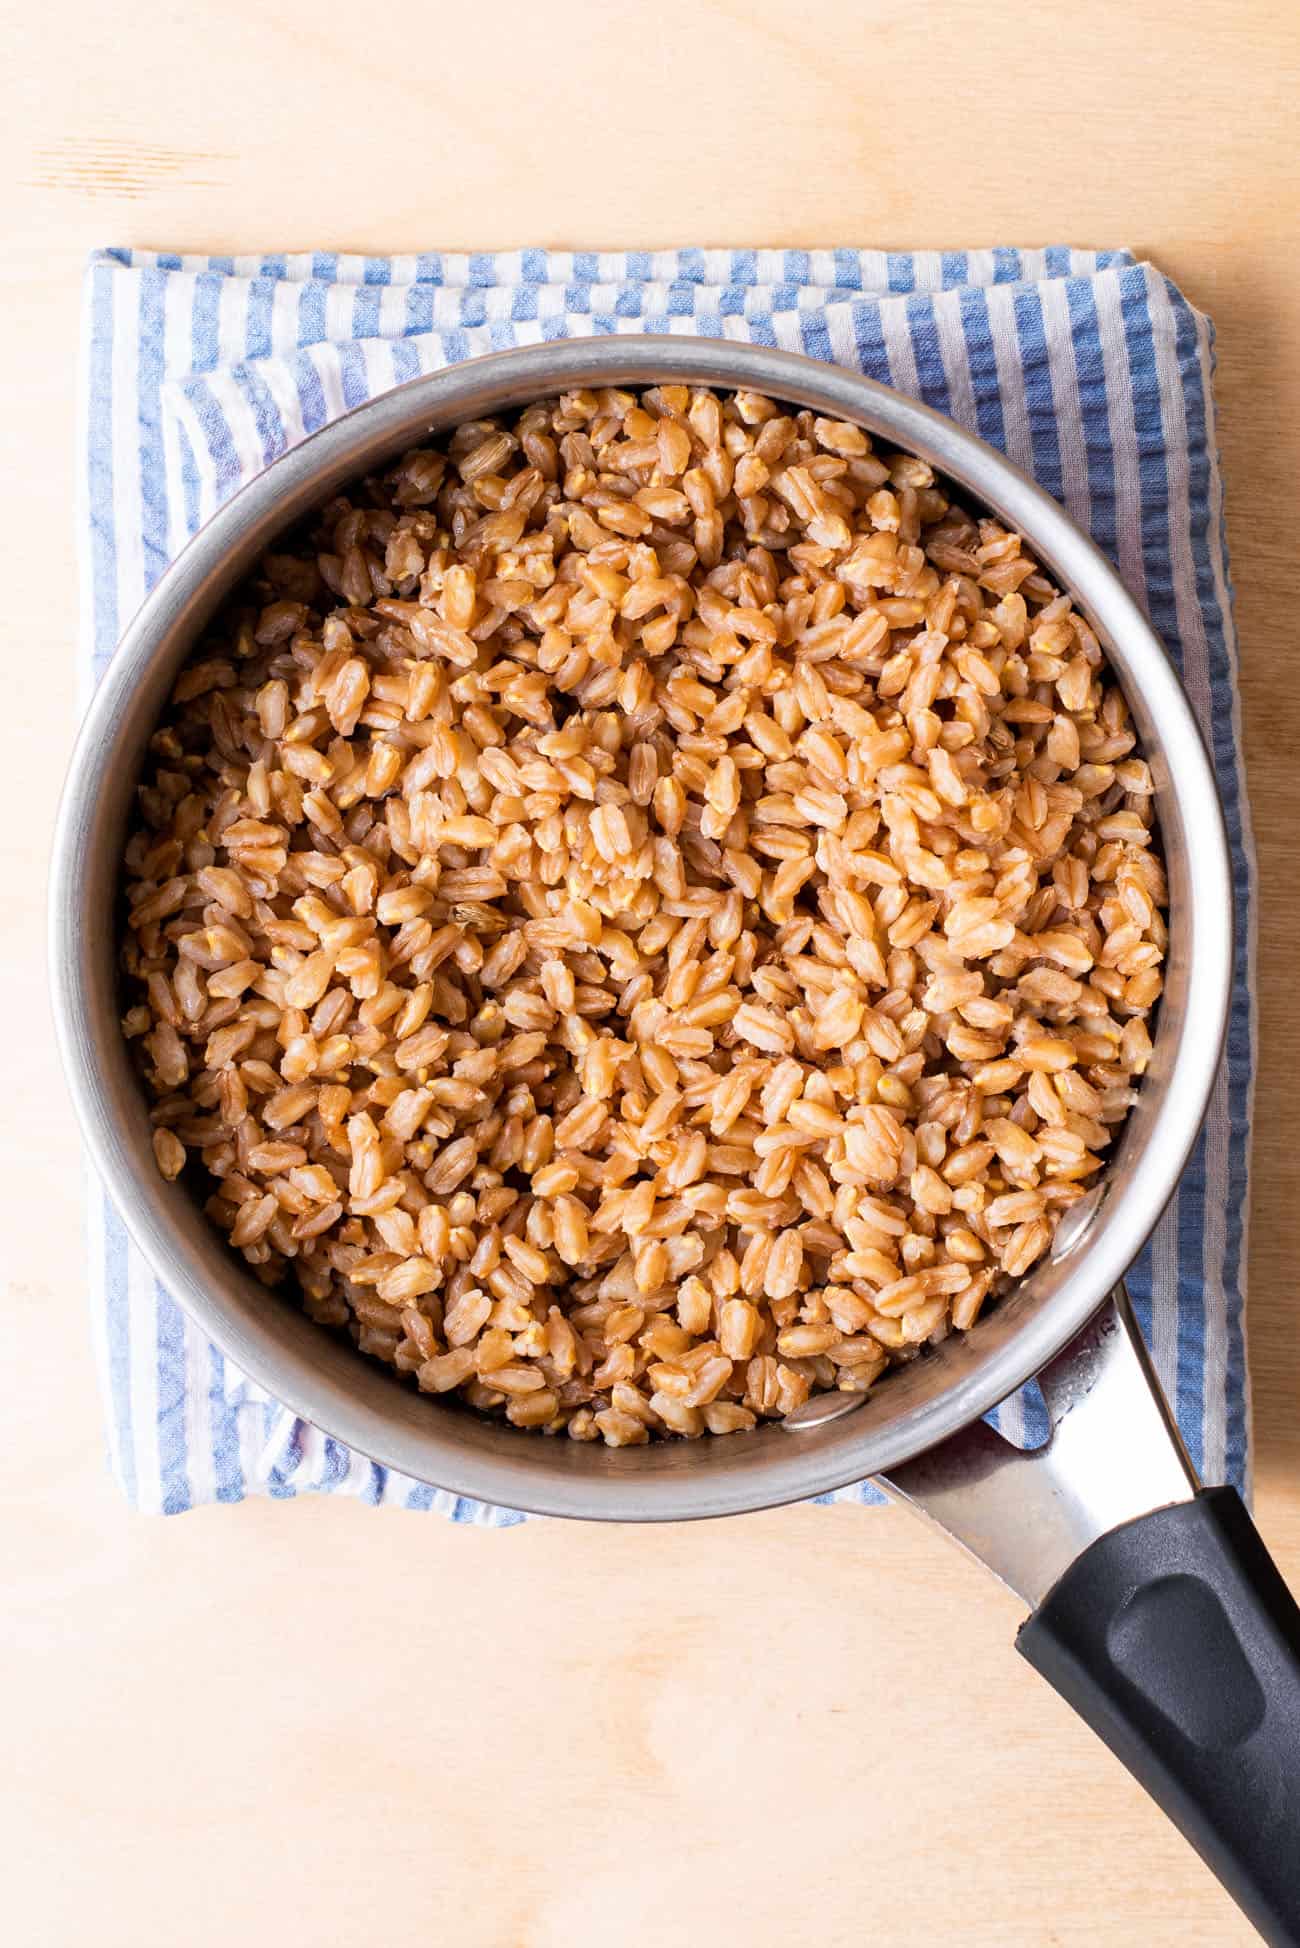 Small pot of cooked farro on a blue striped towel.